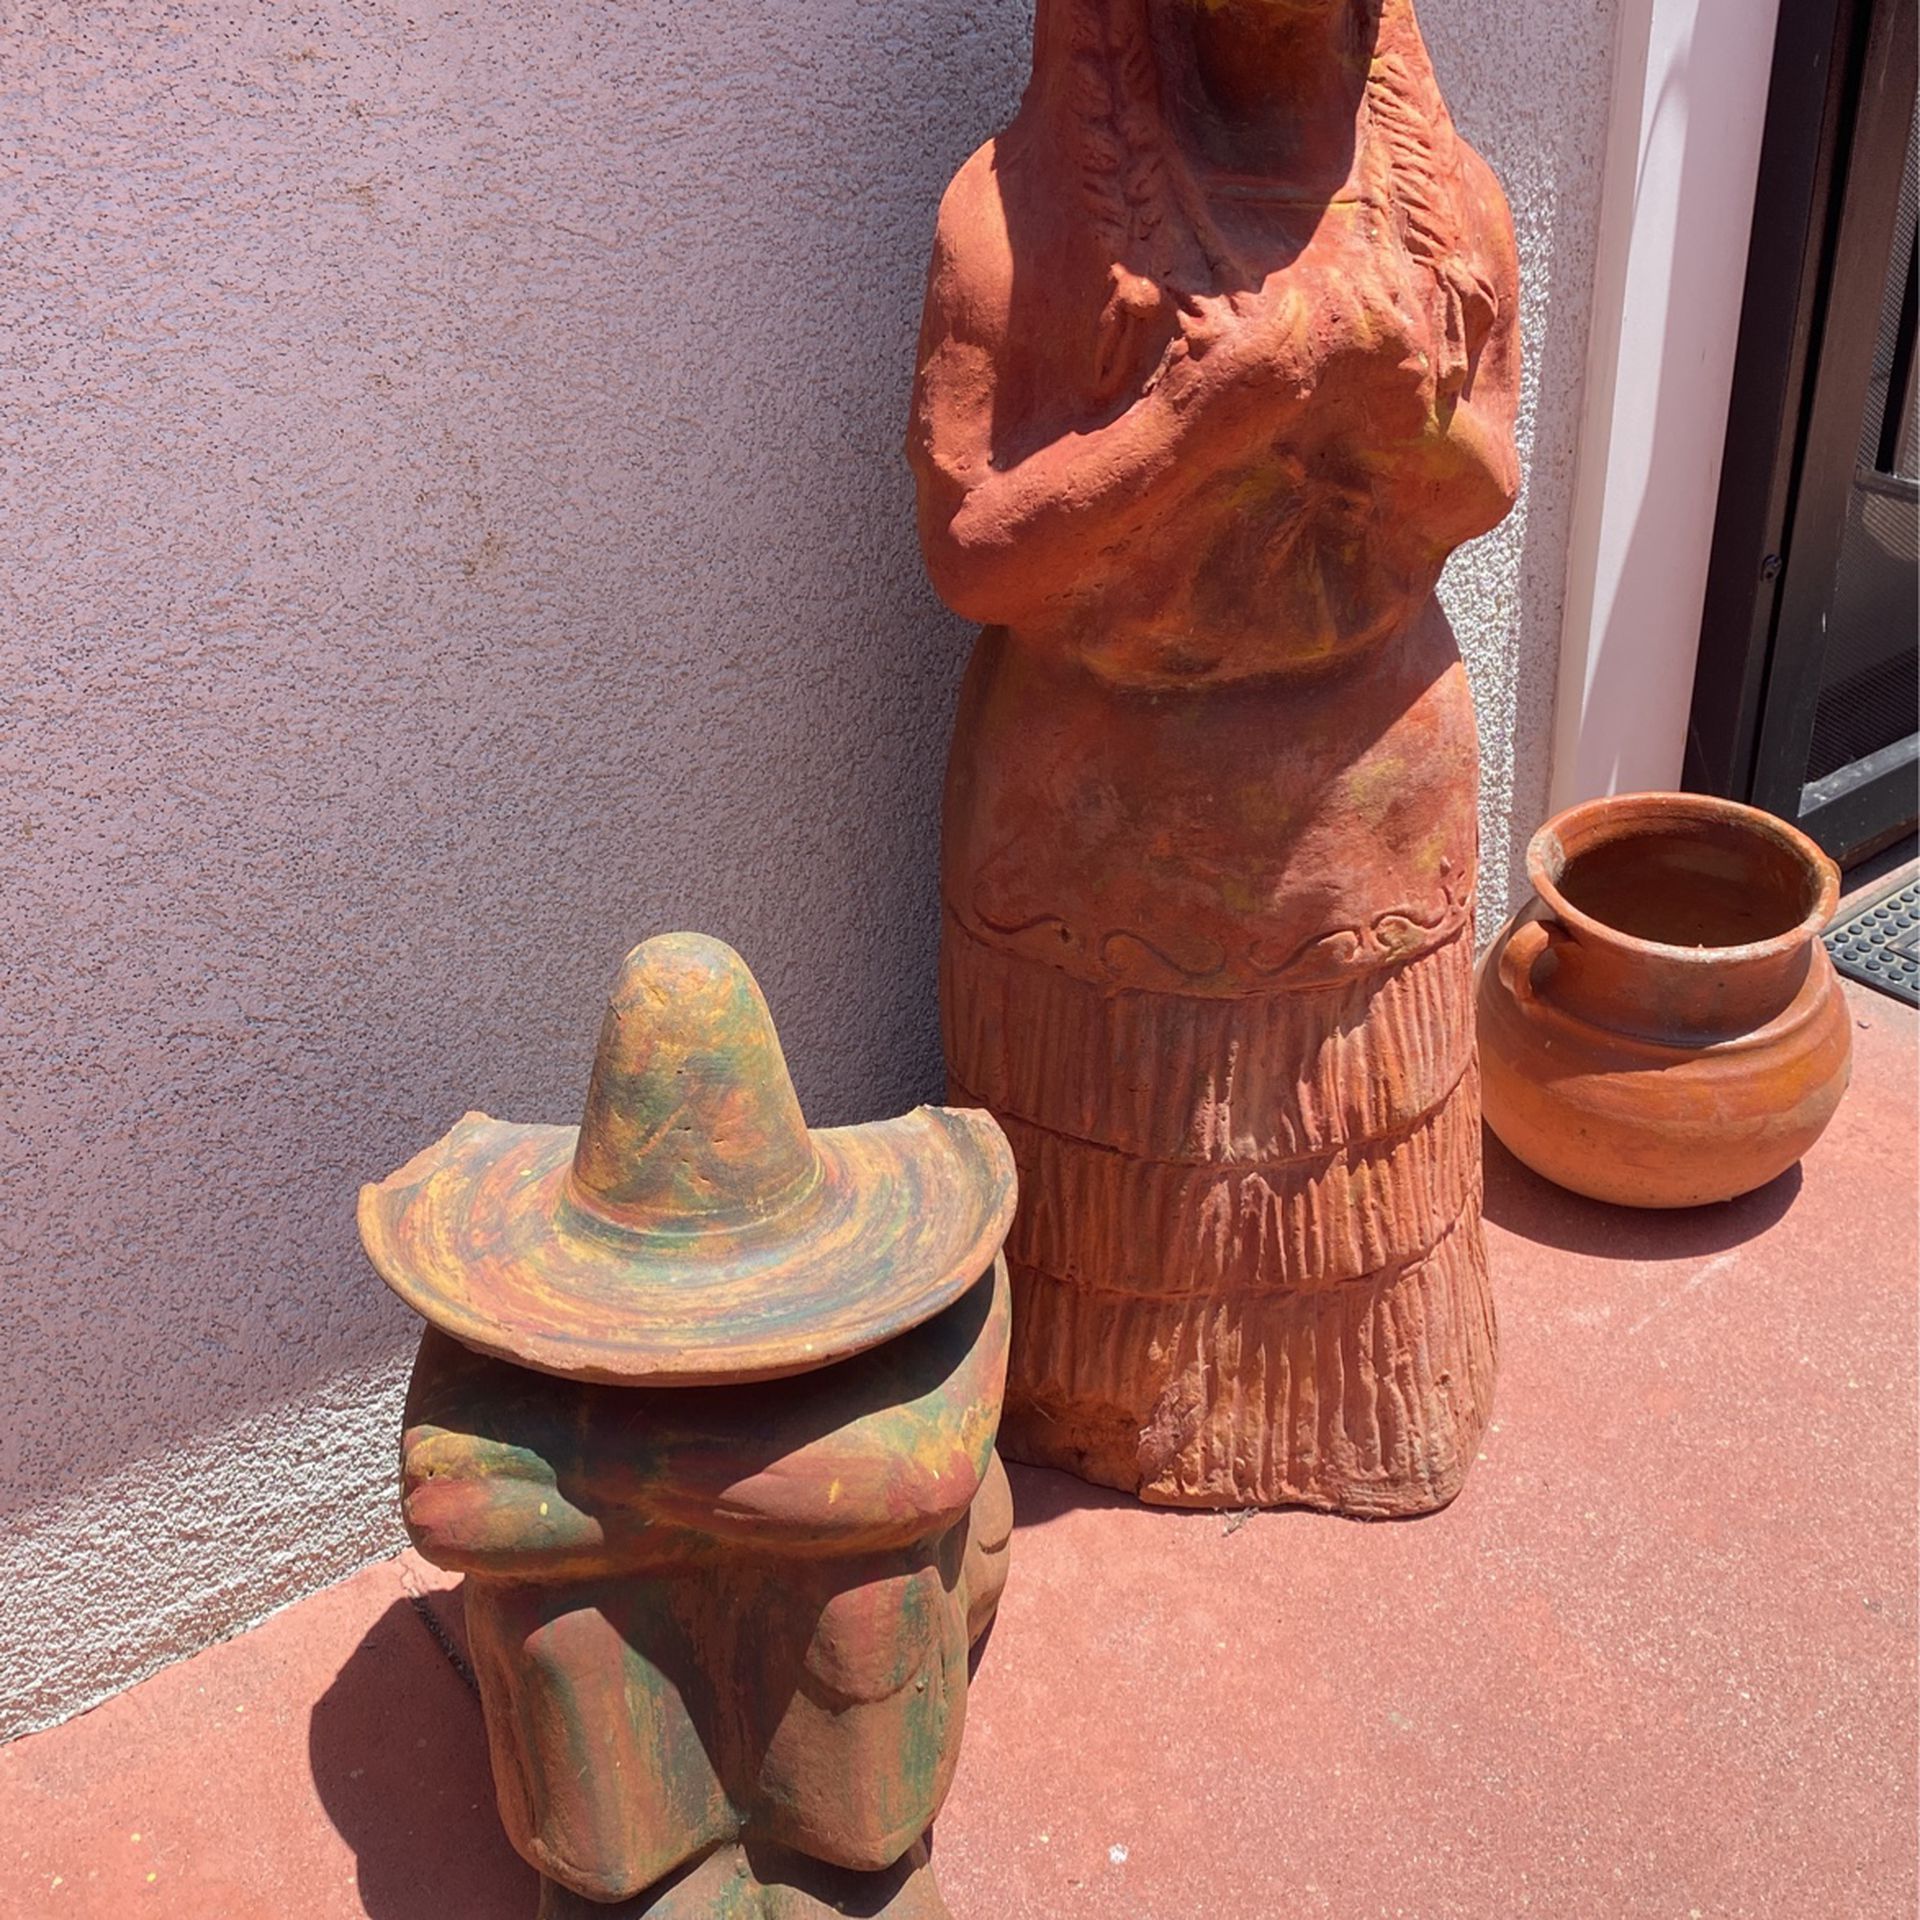 Mexican Patio Decorations, Planters, Birds, Pots, Antique Step Stool, Plants And More More!